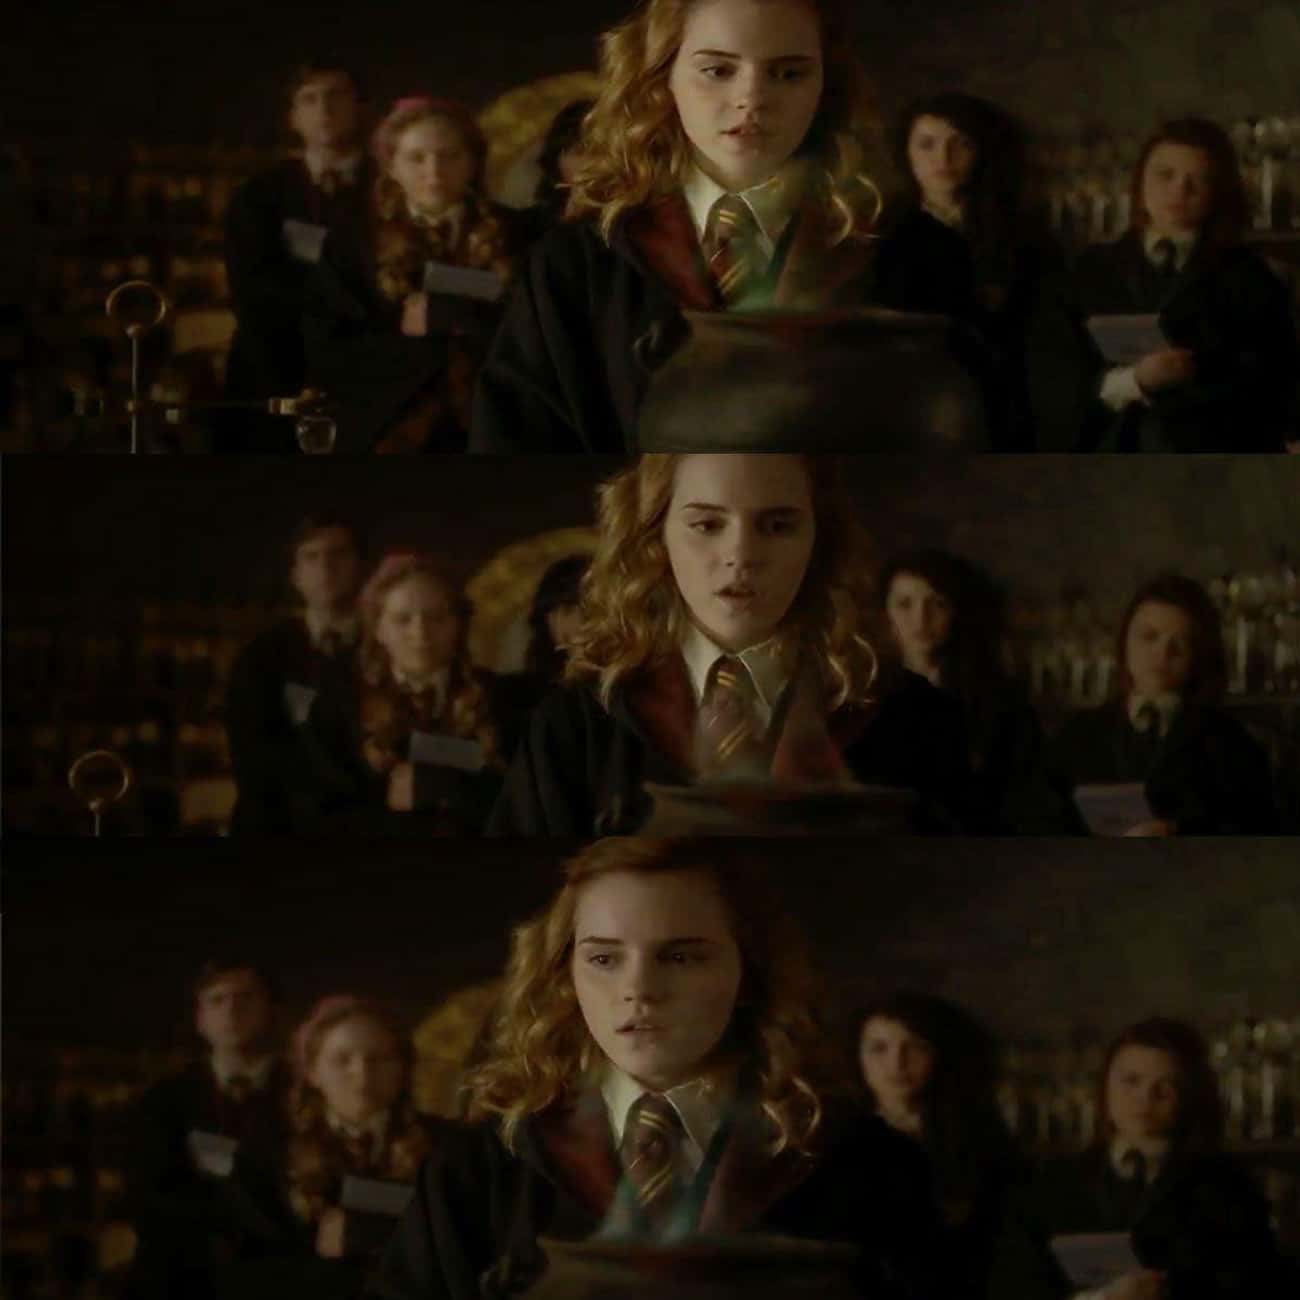 The Amortentia Potion Fumes Change Color As Hermione Describes What She Smells